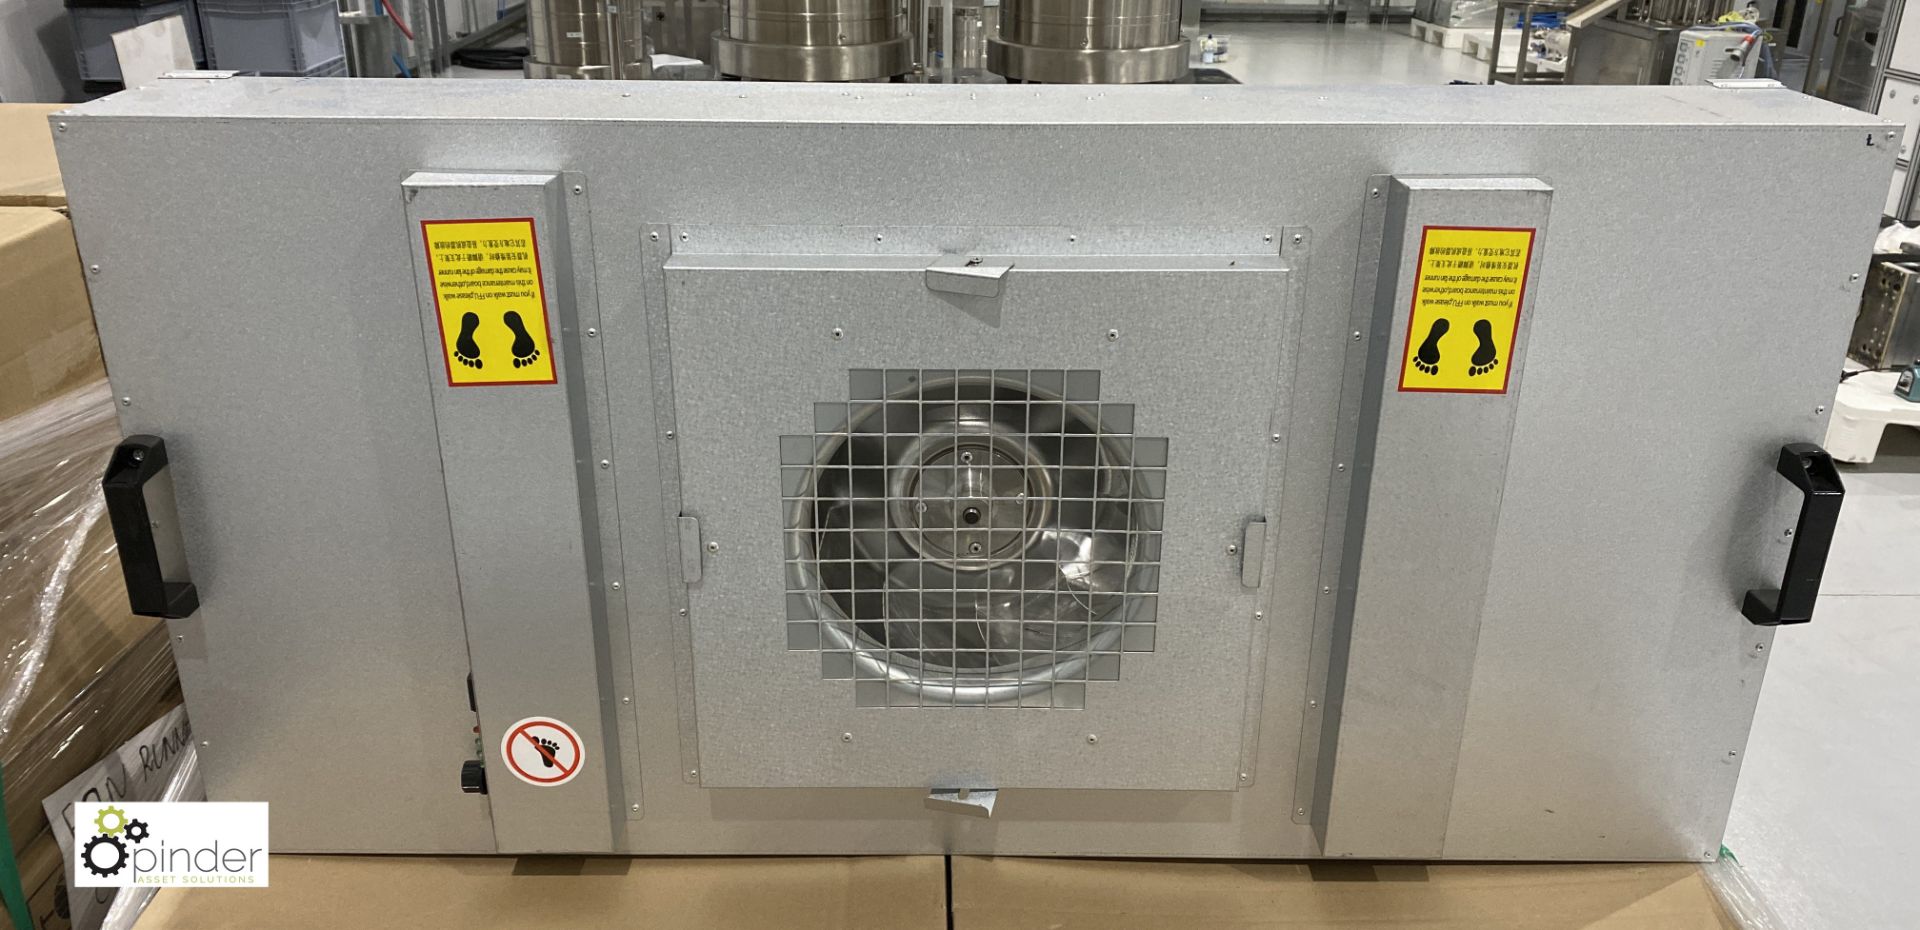 7 FFU SUS201 Clean Room Fan Runners/Housings, 1185mm x 225mm x 590mm, boxed and used and 2 FFU